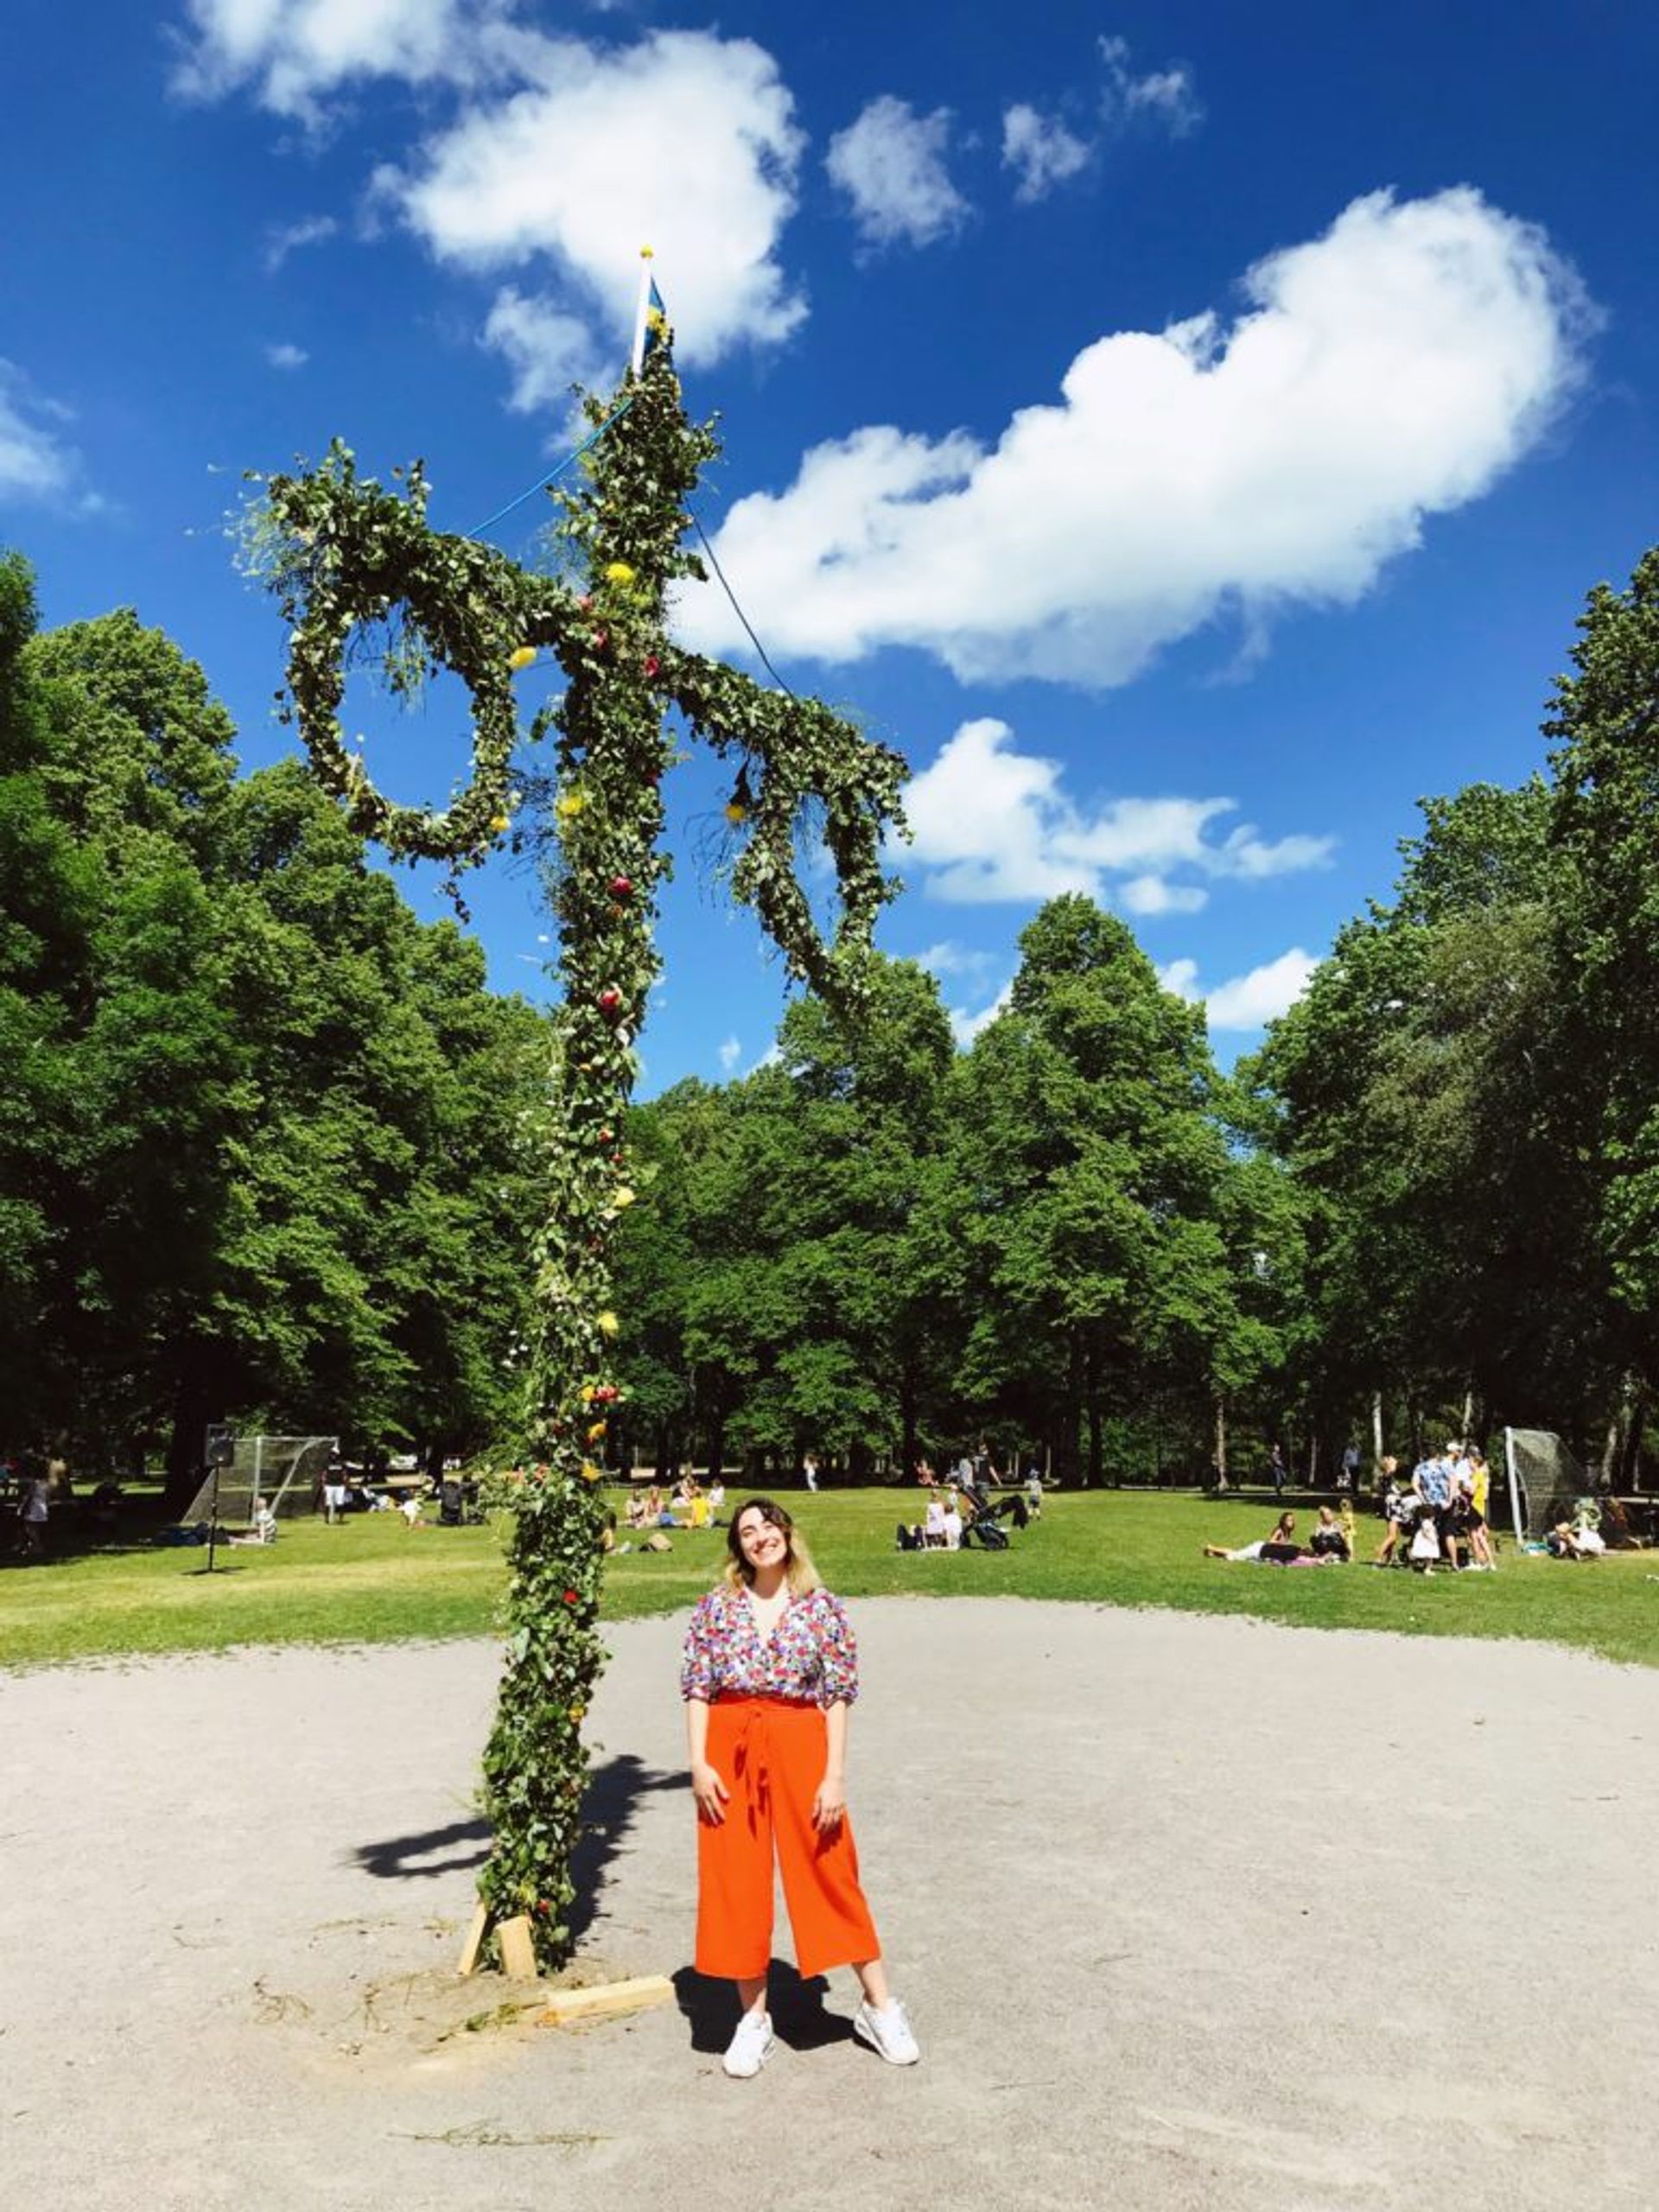 Hazal stands in front of the Midsummer maypole.